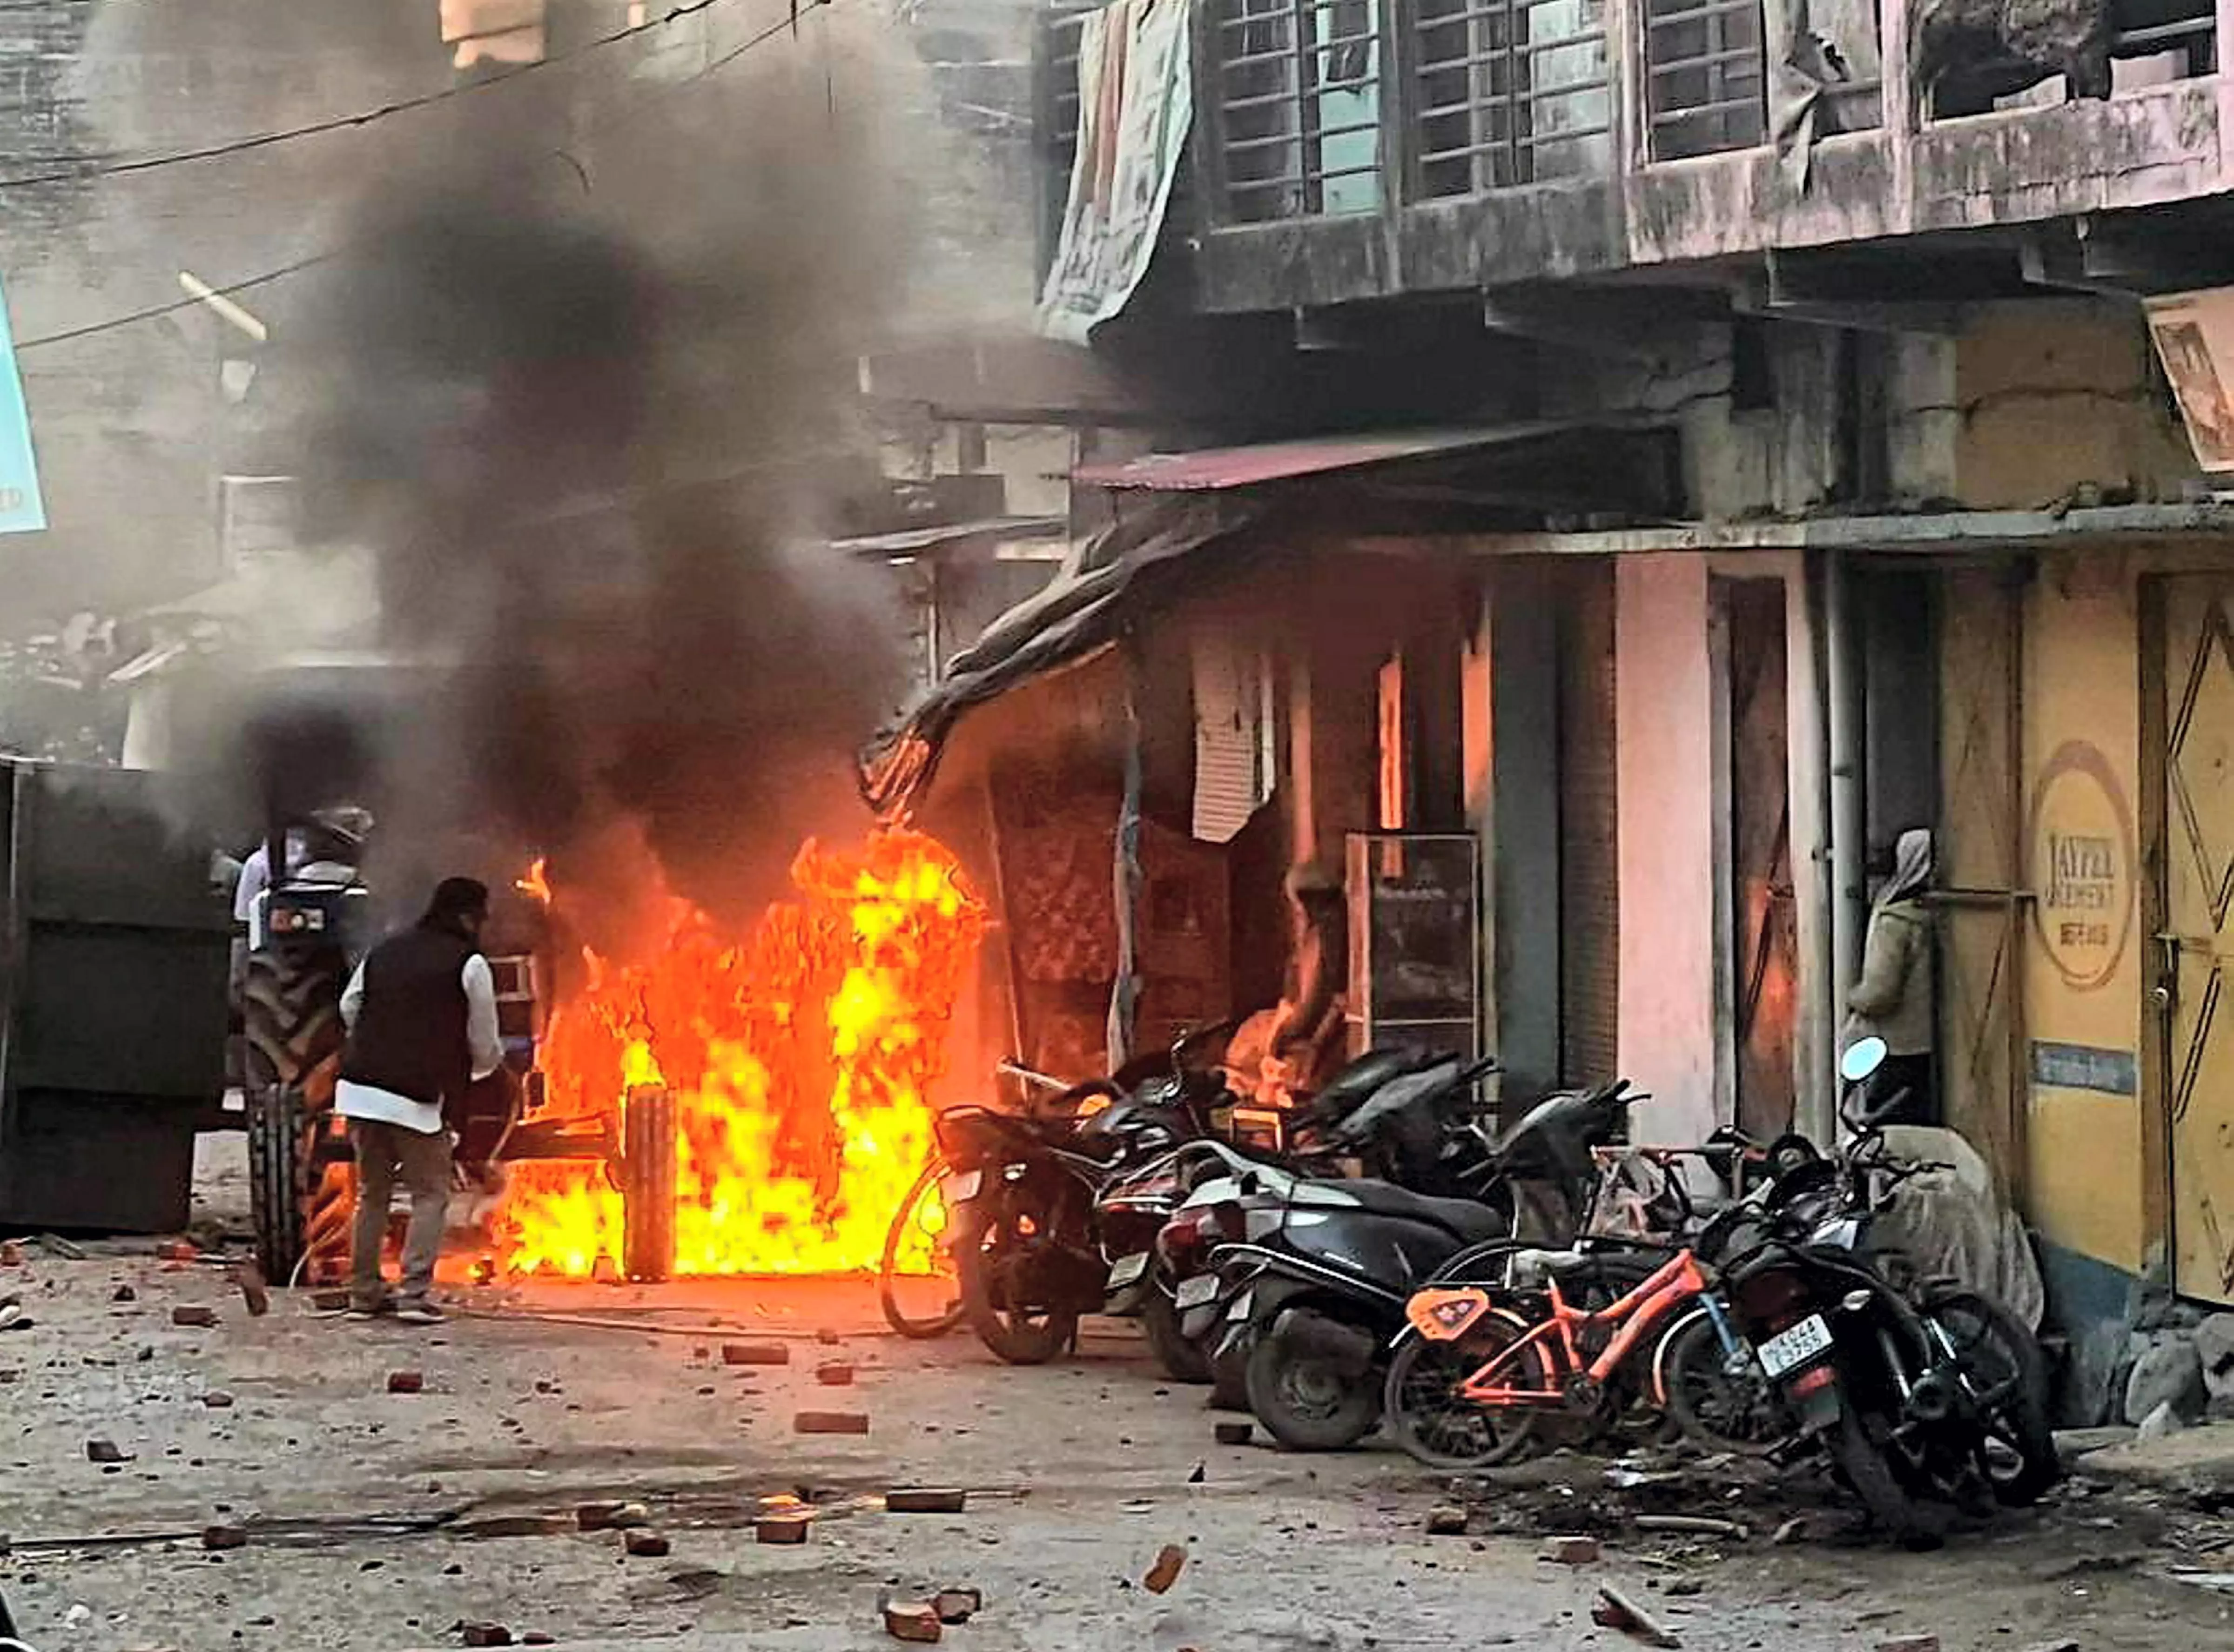 Haldwani: Violence over madrasa demolition: Curfew lifted from outer areas